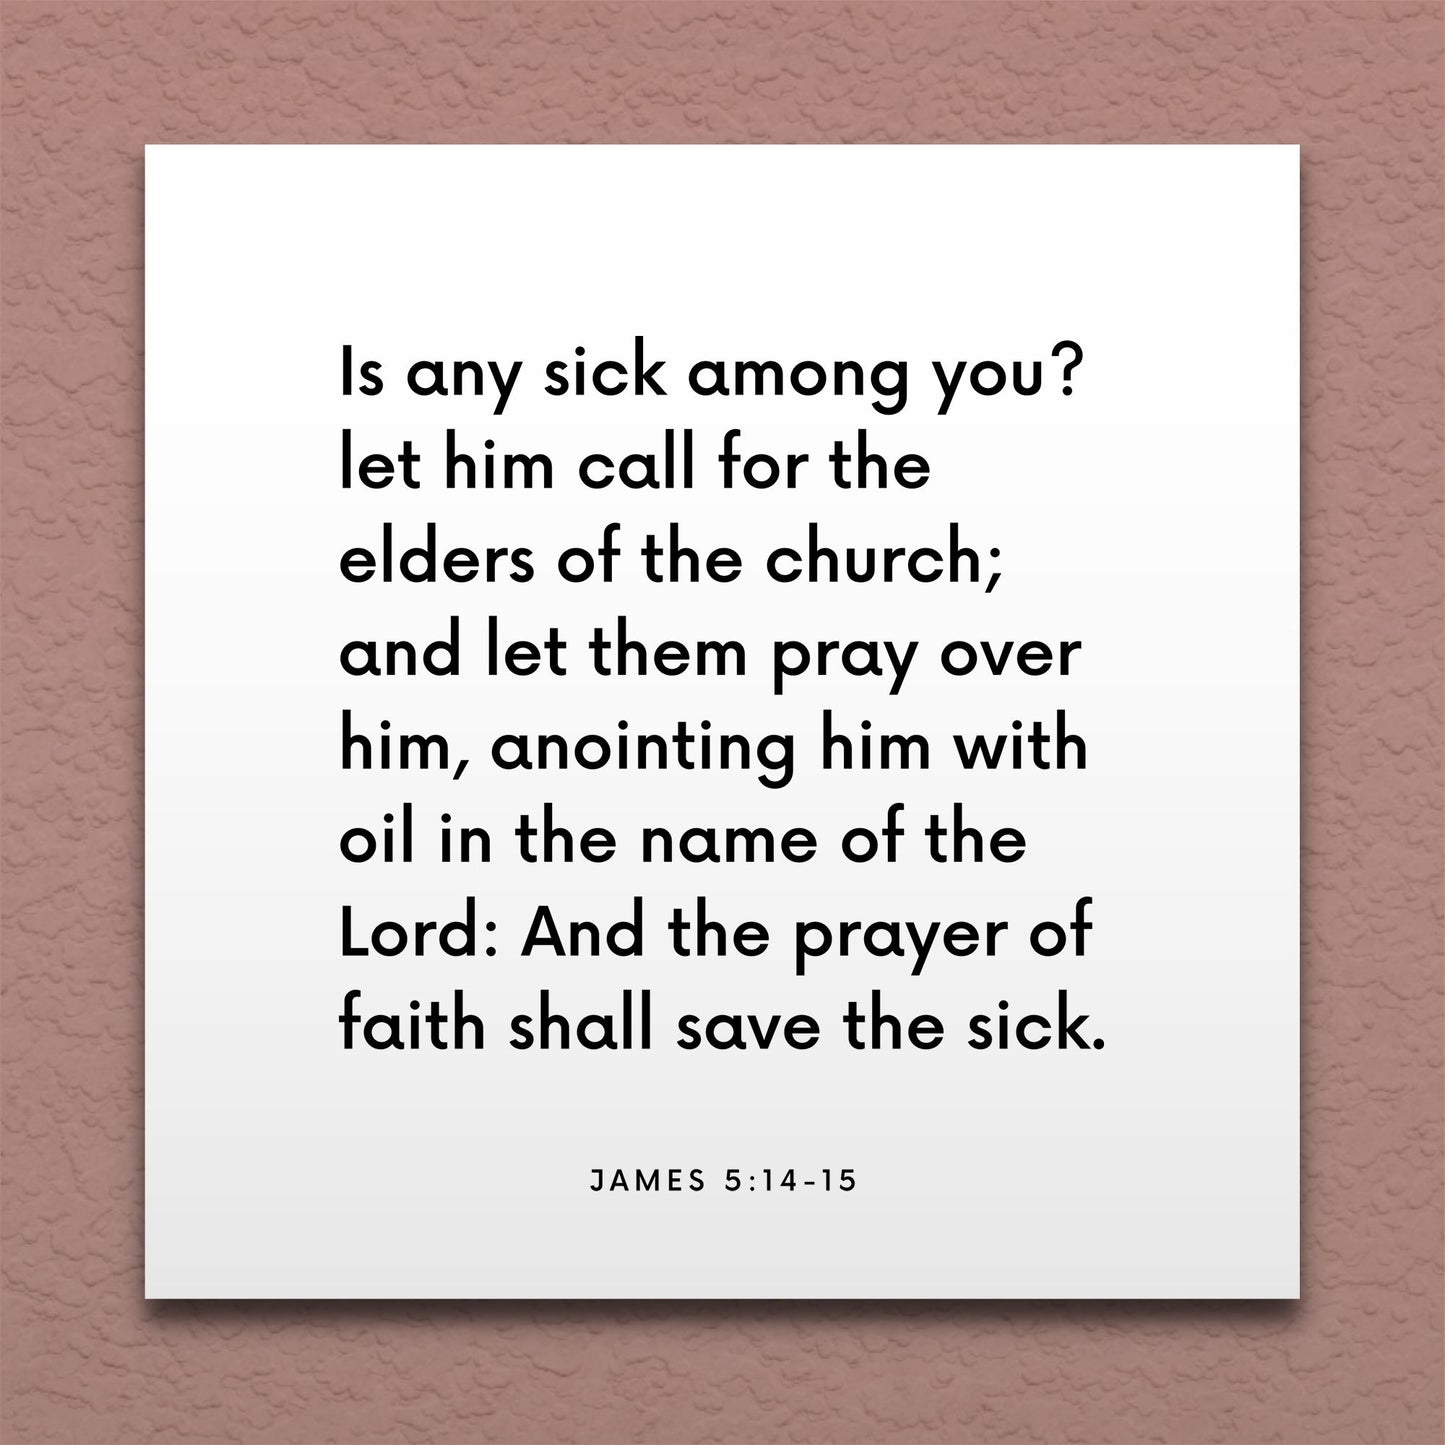 Wall-mounted scripture tile for James 5:14-15 - "Is any sick among you? let him call for the elders"